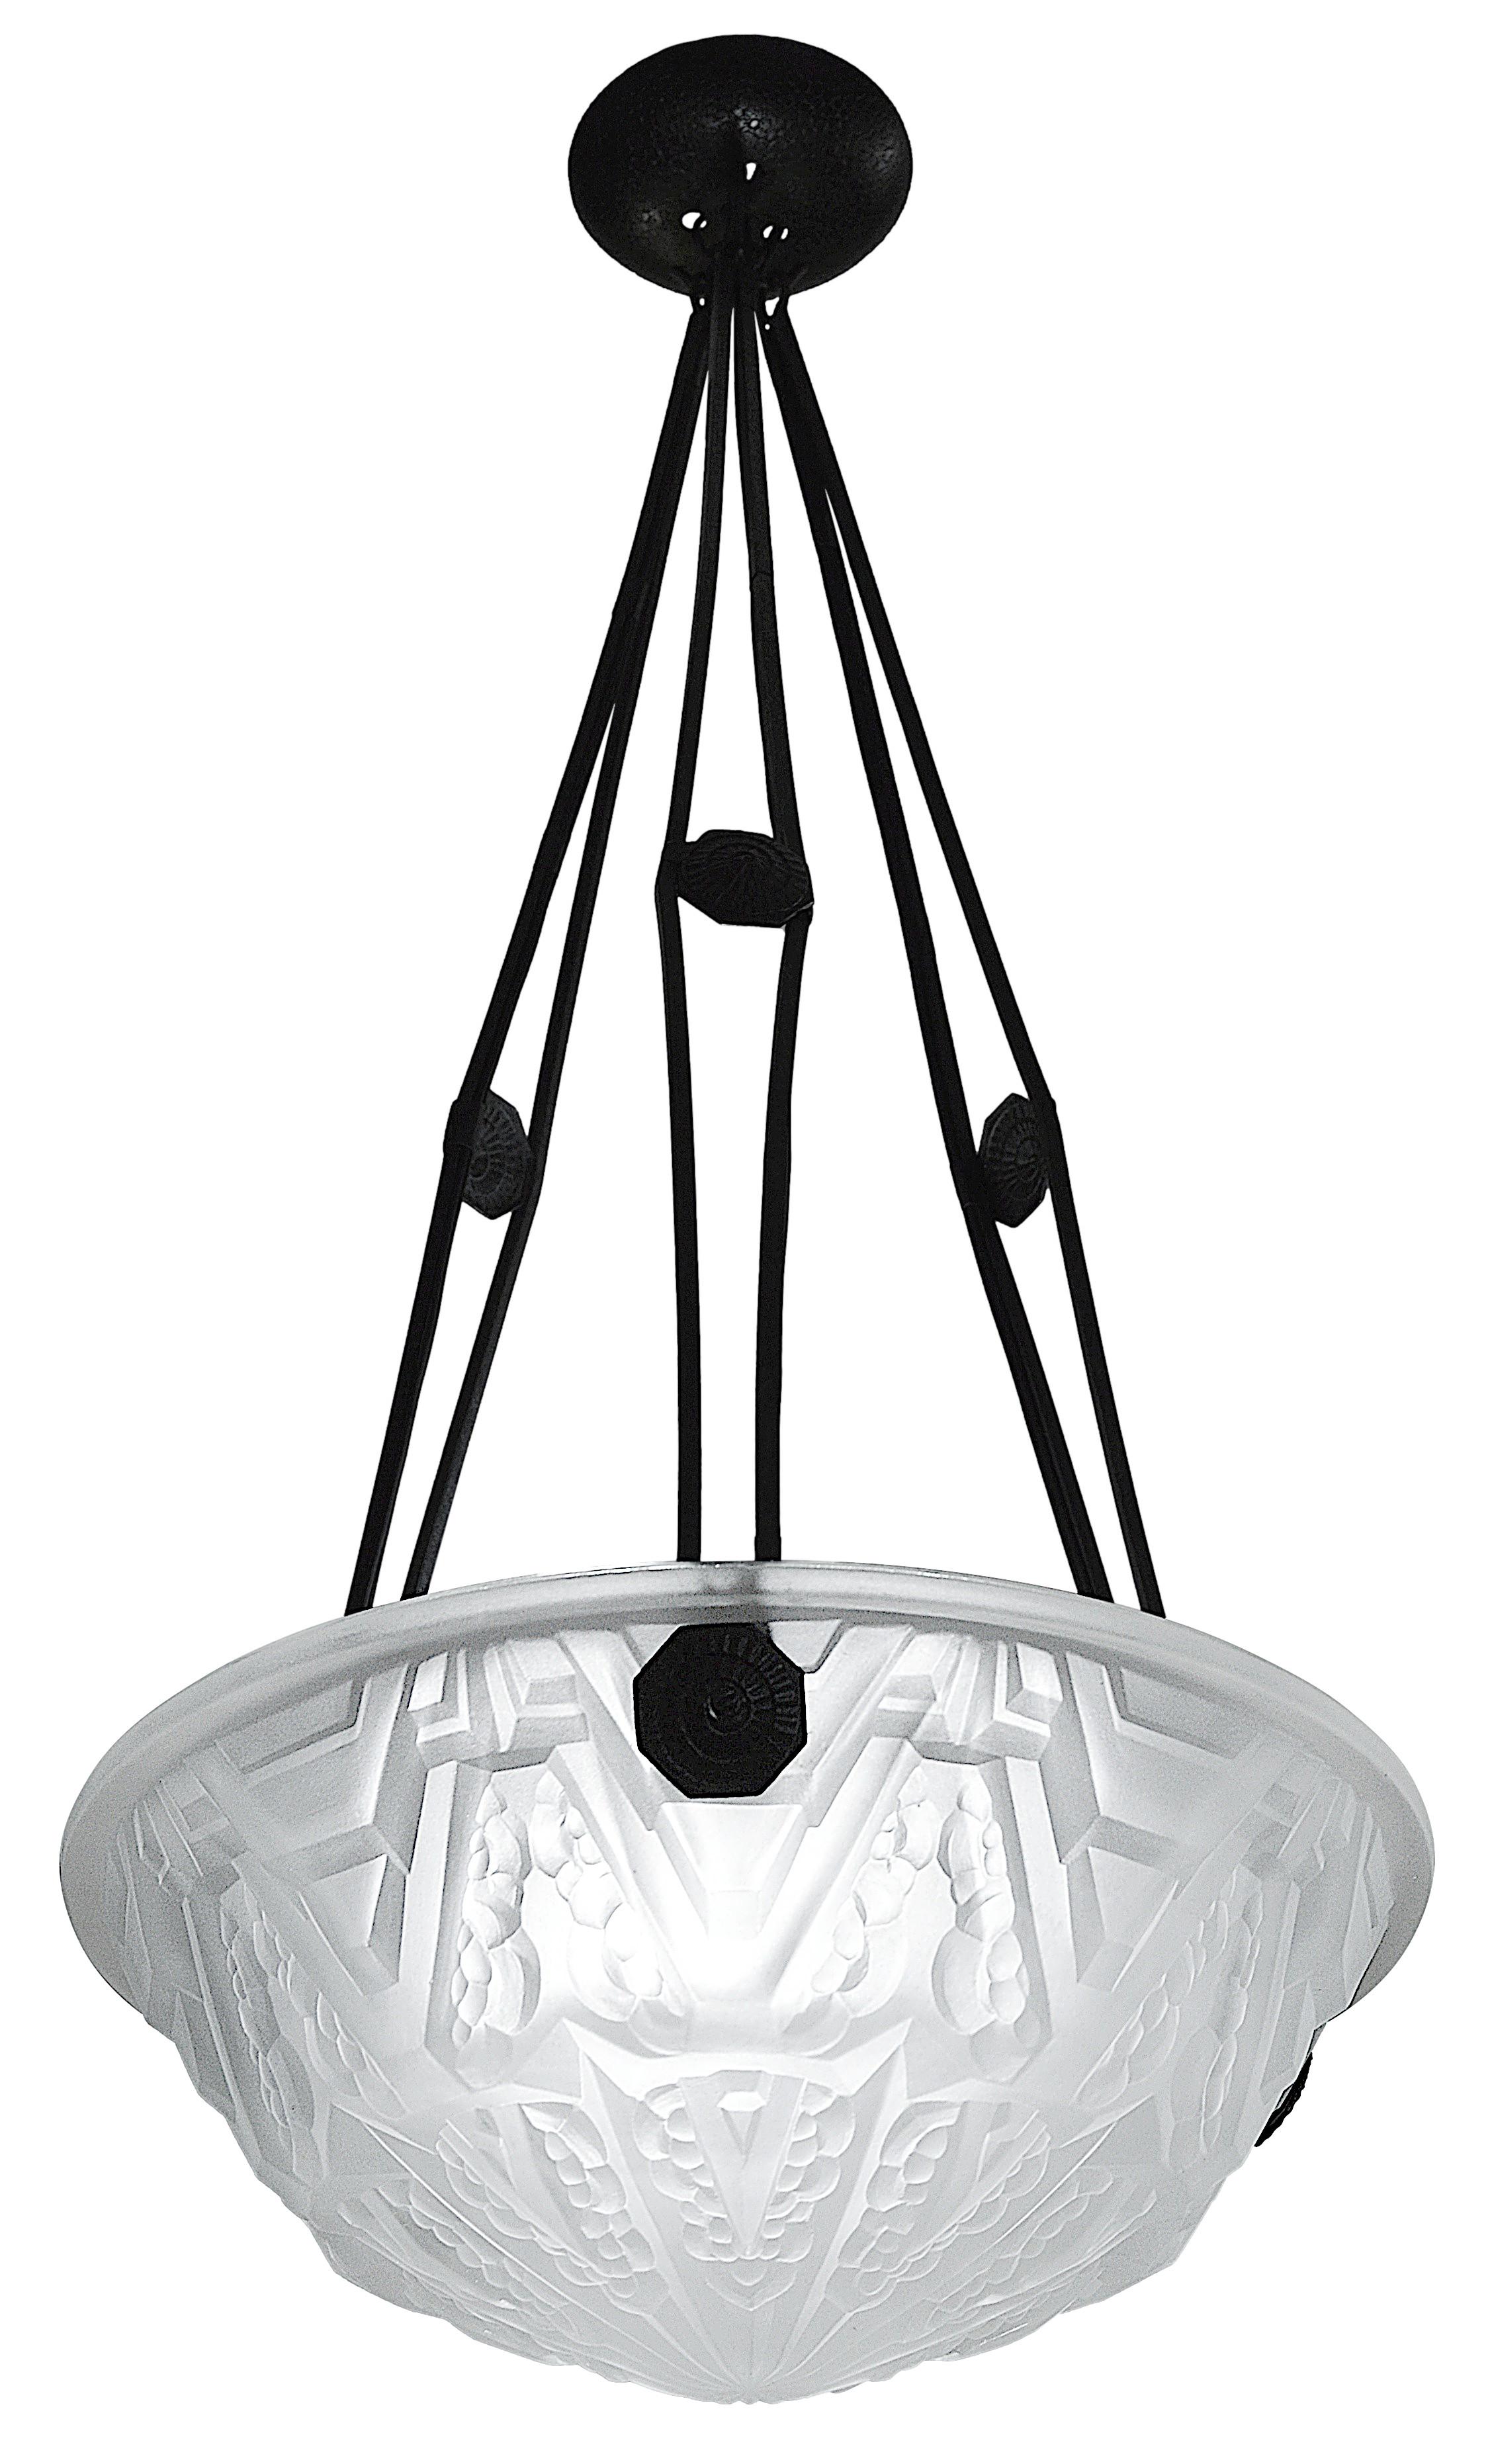 French Art Deco pendant chandelier by Verrerie des Hanots (Les Andelys), France, ca.1925. Thick opalescent molded glass. White glass very slightly tinted yellow. Wrought-iron fixture. Measures: height: 30.7